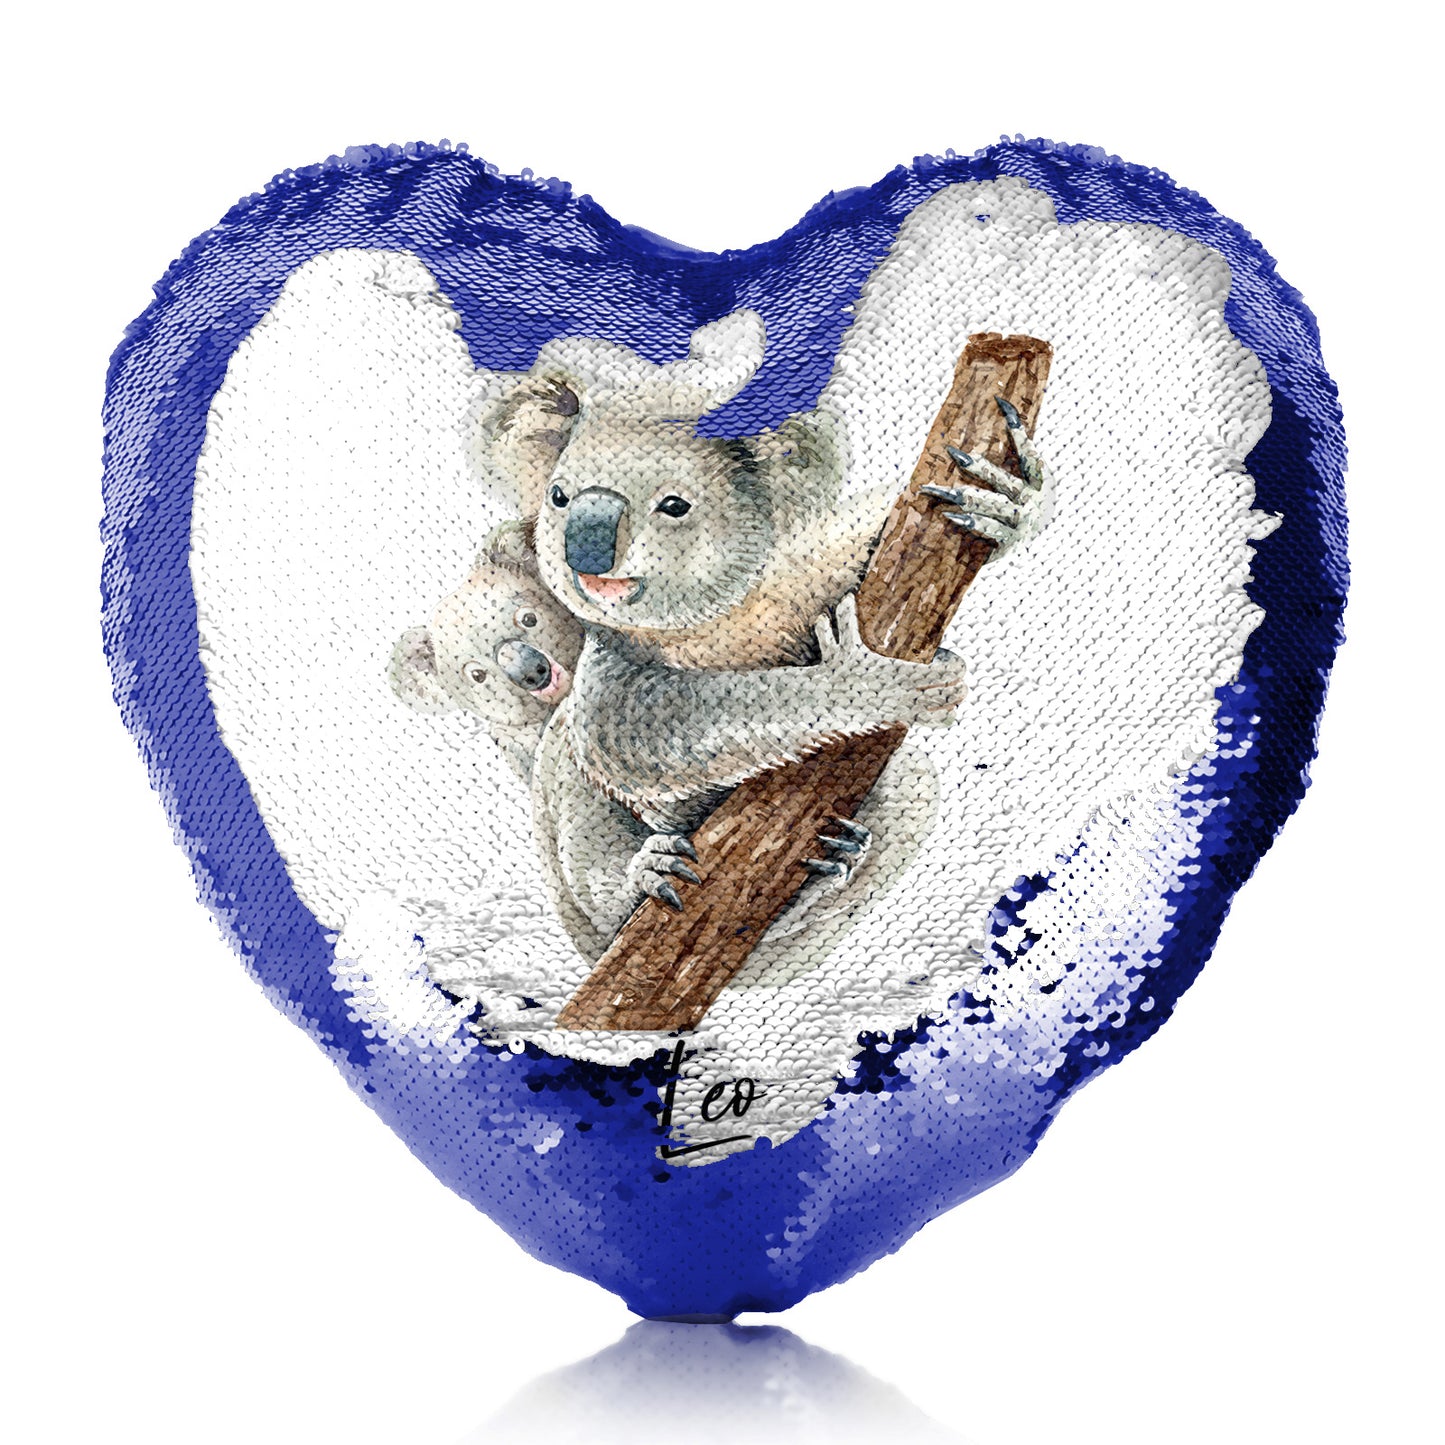 Personalised Sequin Heart Cushion with Welcoming Text and Climbing Mum and Baby Koalas